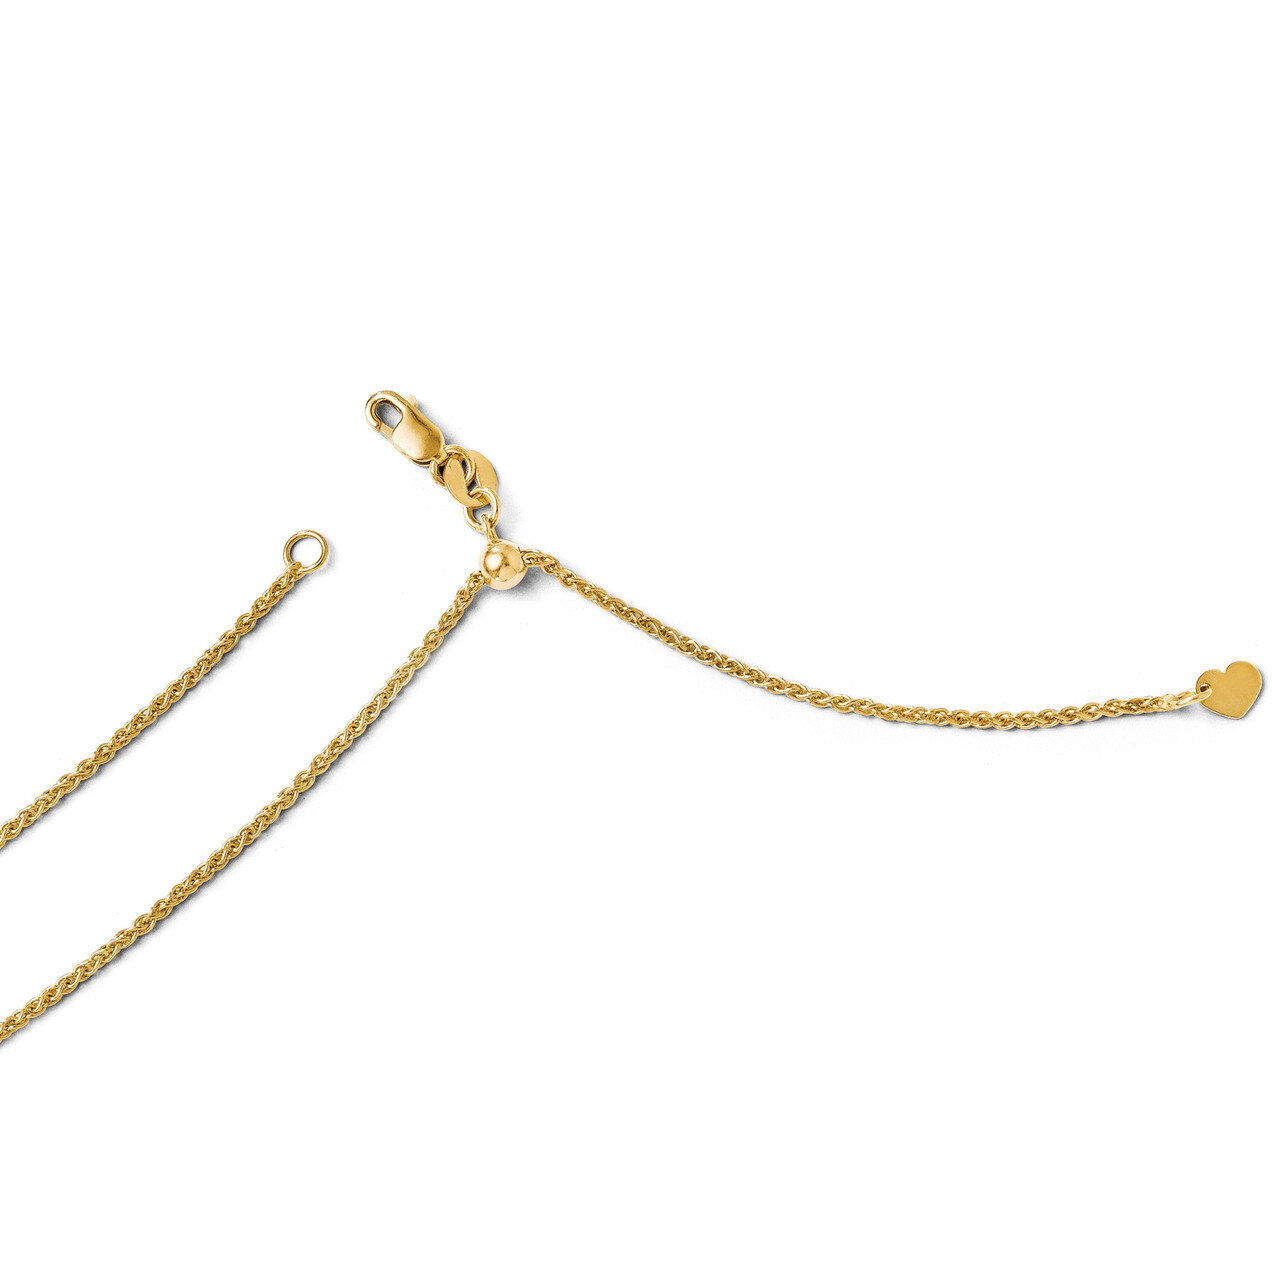 Adjustable Wheat Chain 30 Inch - 14k Gold HB-3186-30